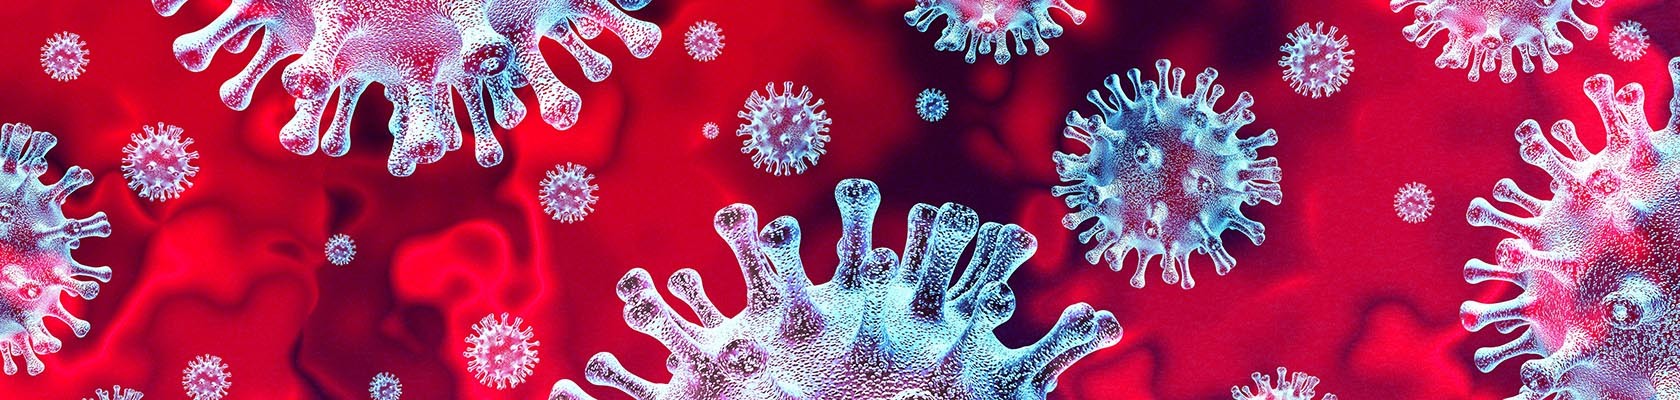 Illustration of coronaviruses for COVID-19 research collection © Brain light / Alamy Stock Photo